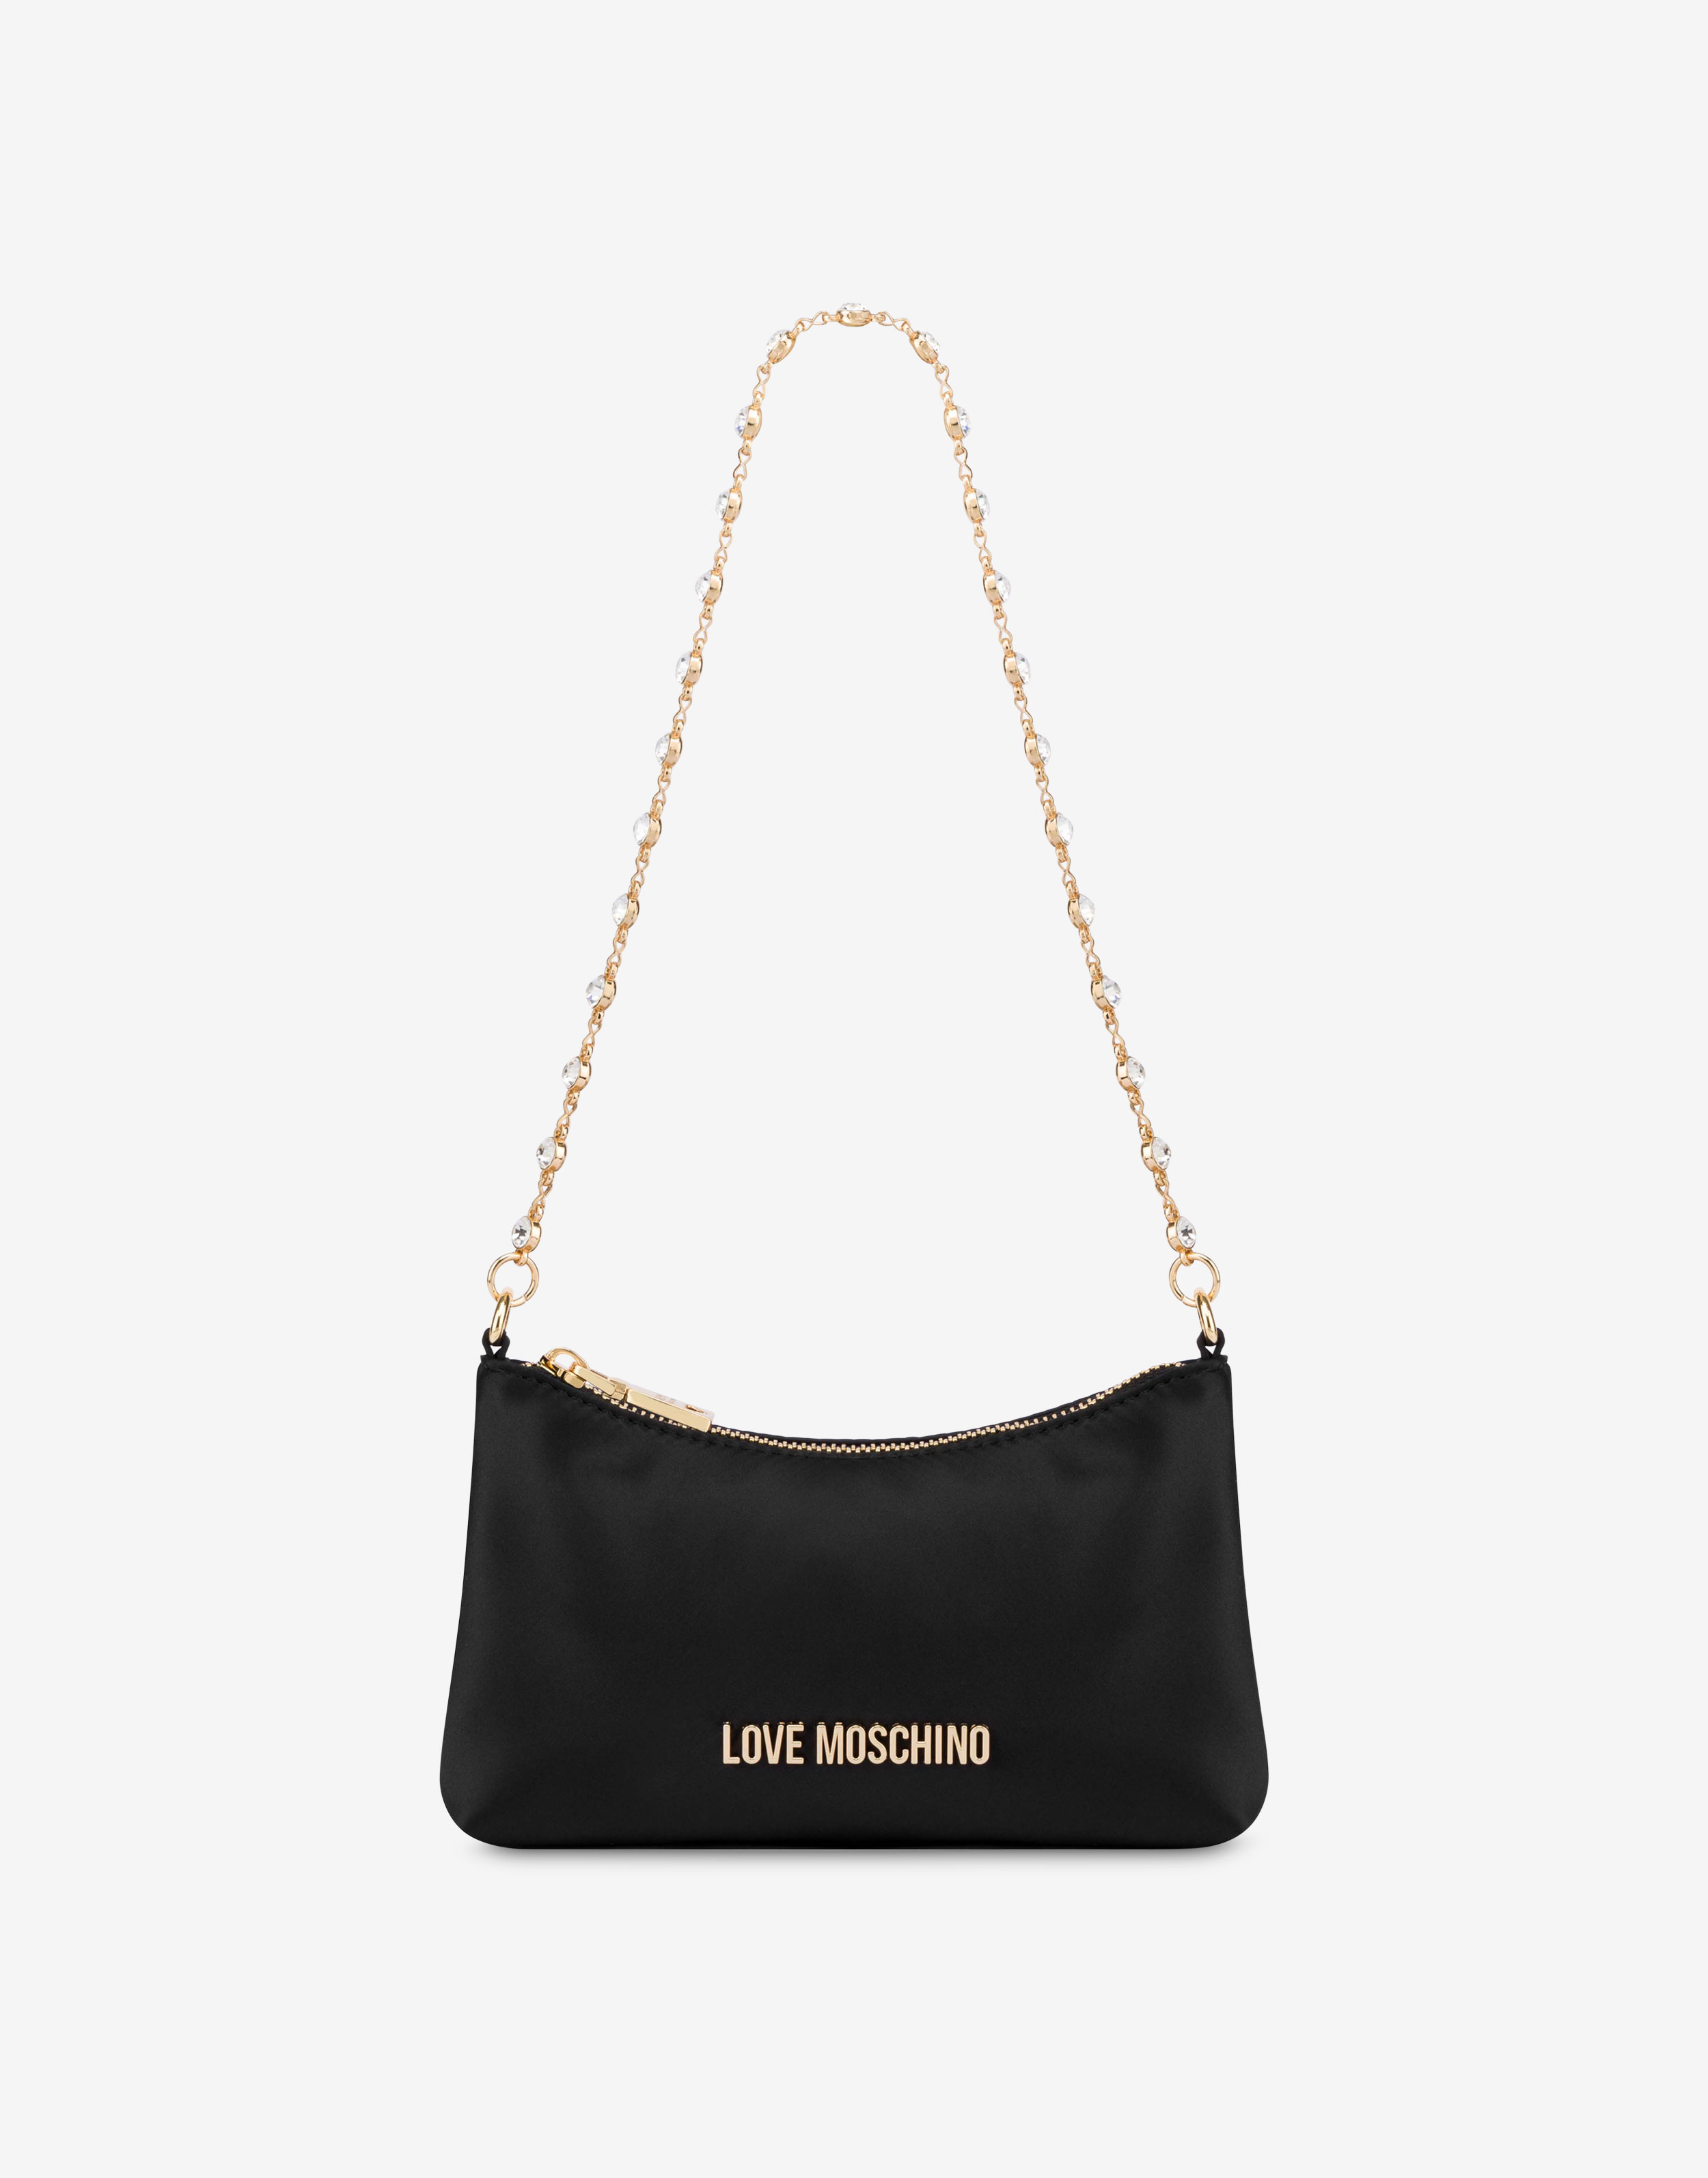 Love Moschino Bags for Sale - Official Store